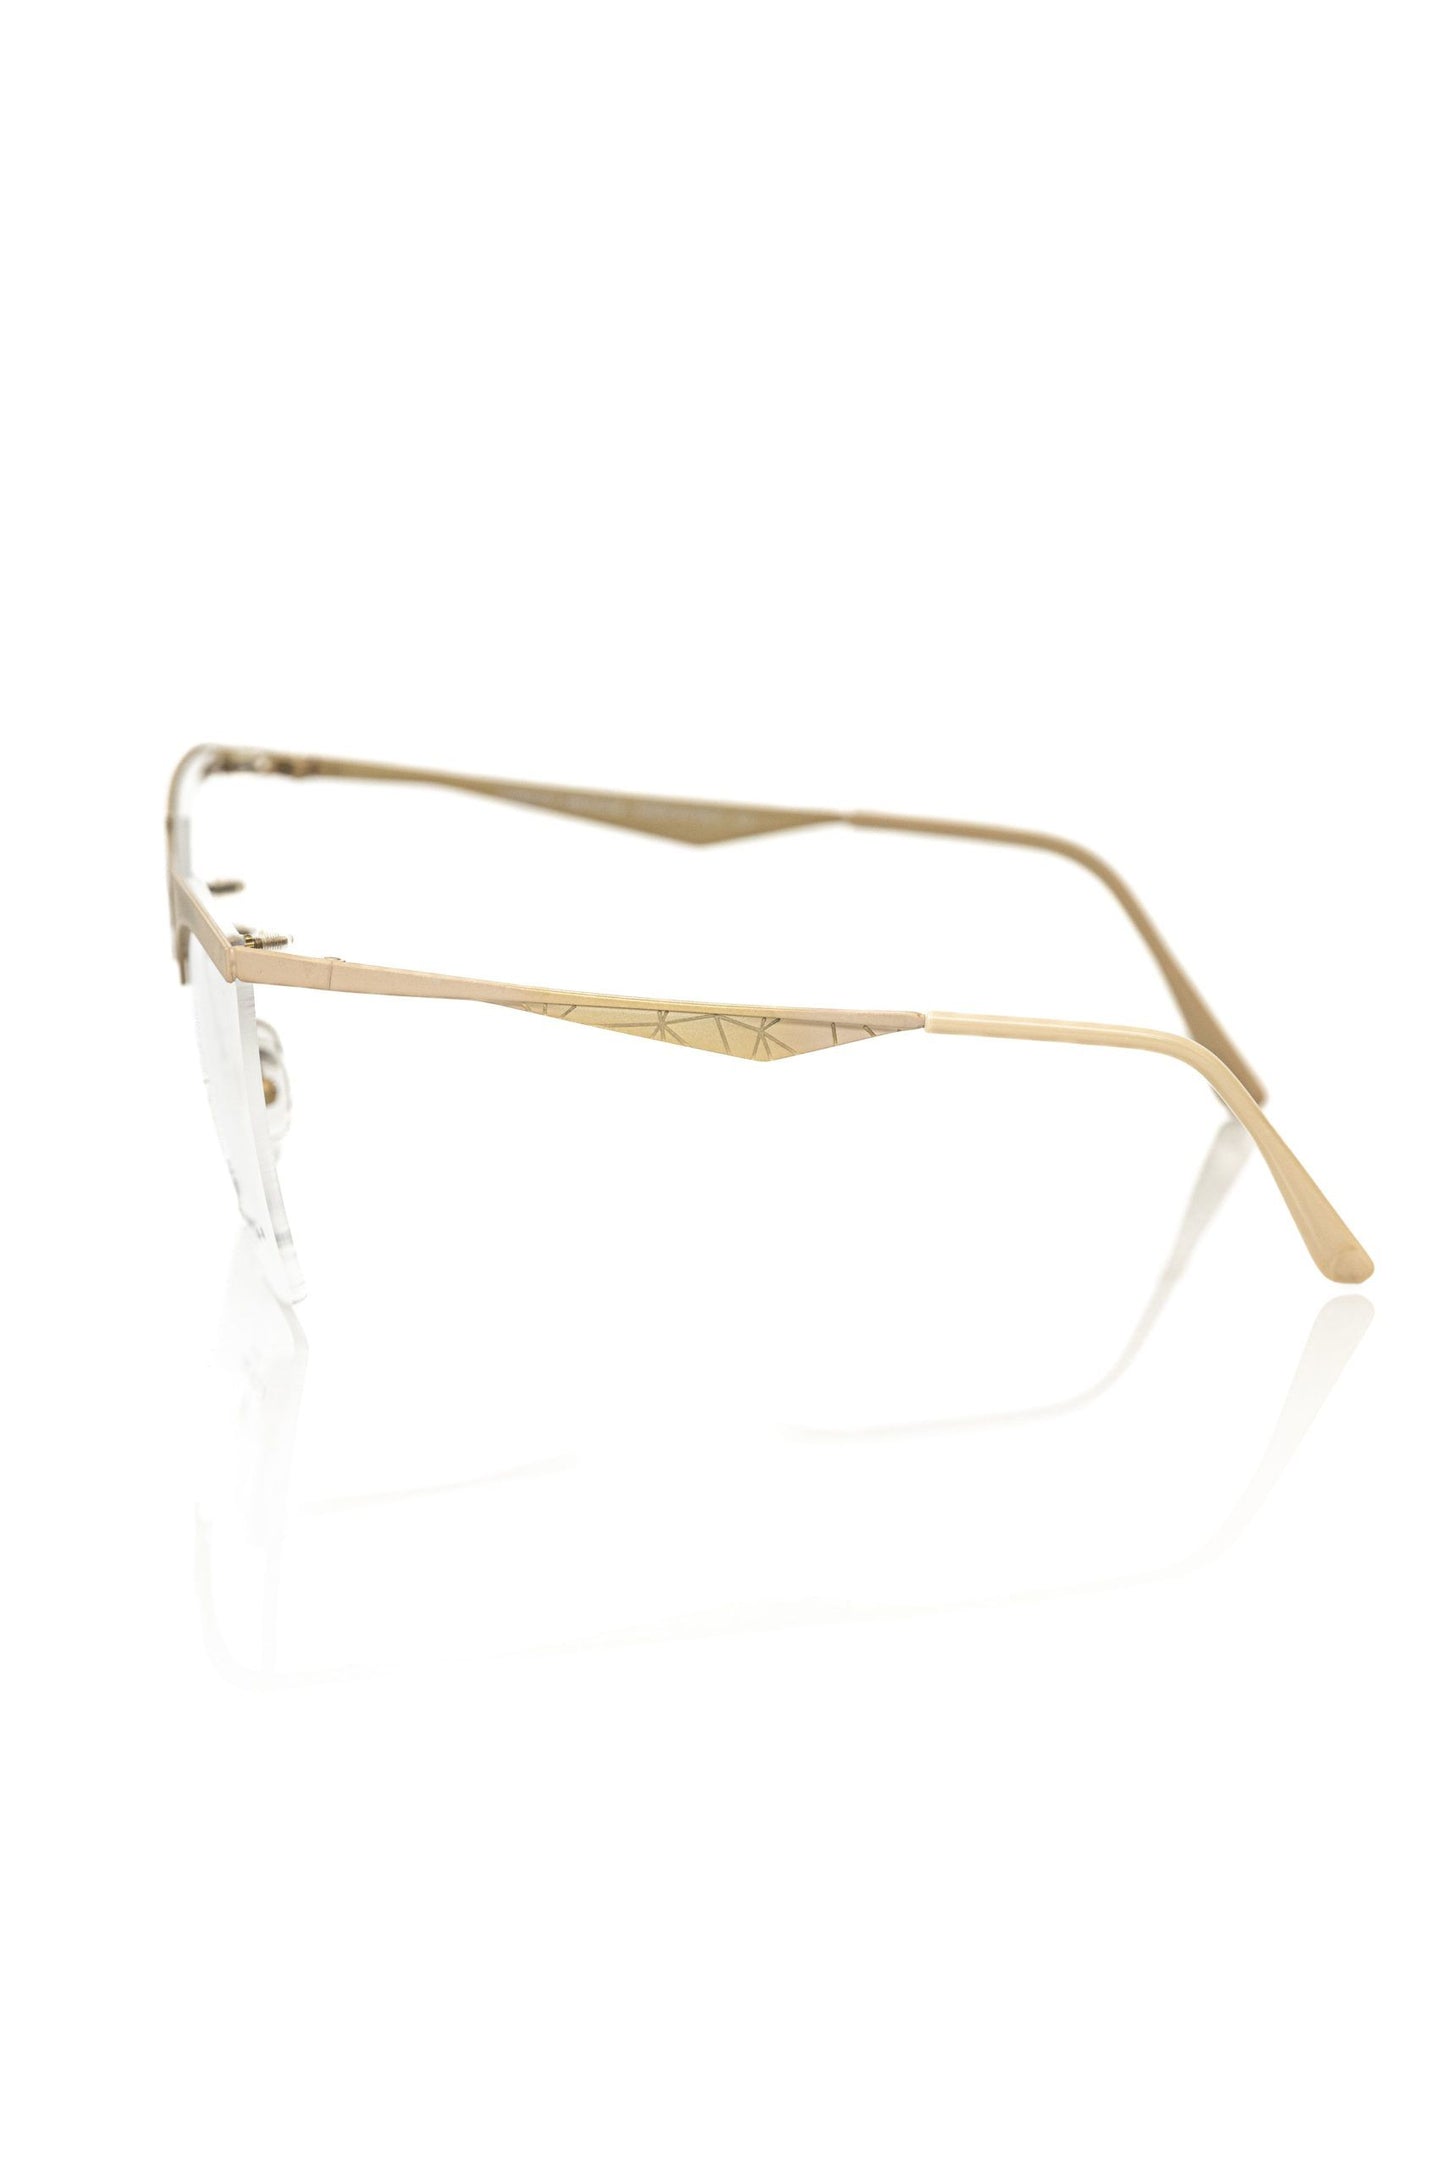 Frankie Morello FRMO-22116 Brown Metallic Fibre Frames - Designed by Frankie Morello Available to Buy at a Discounted Price on Moon Behind The Hill Online Designer Discount Store